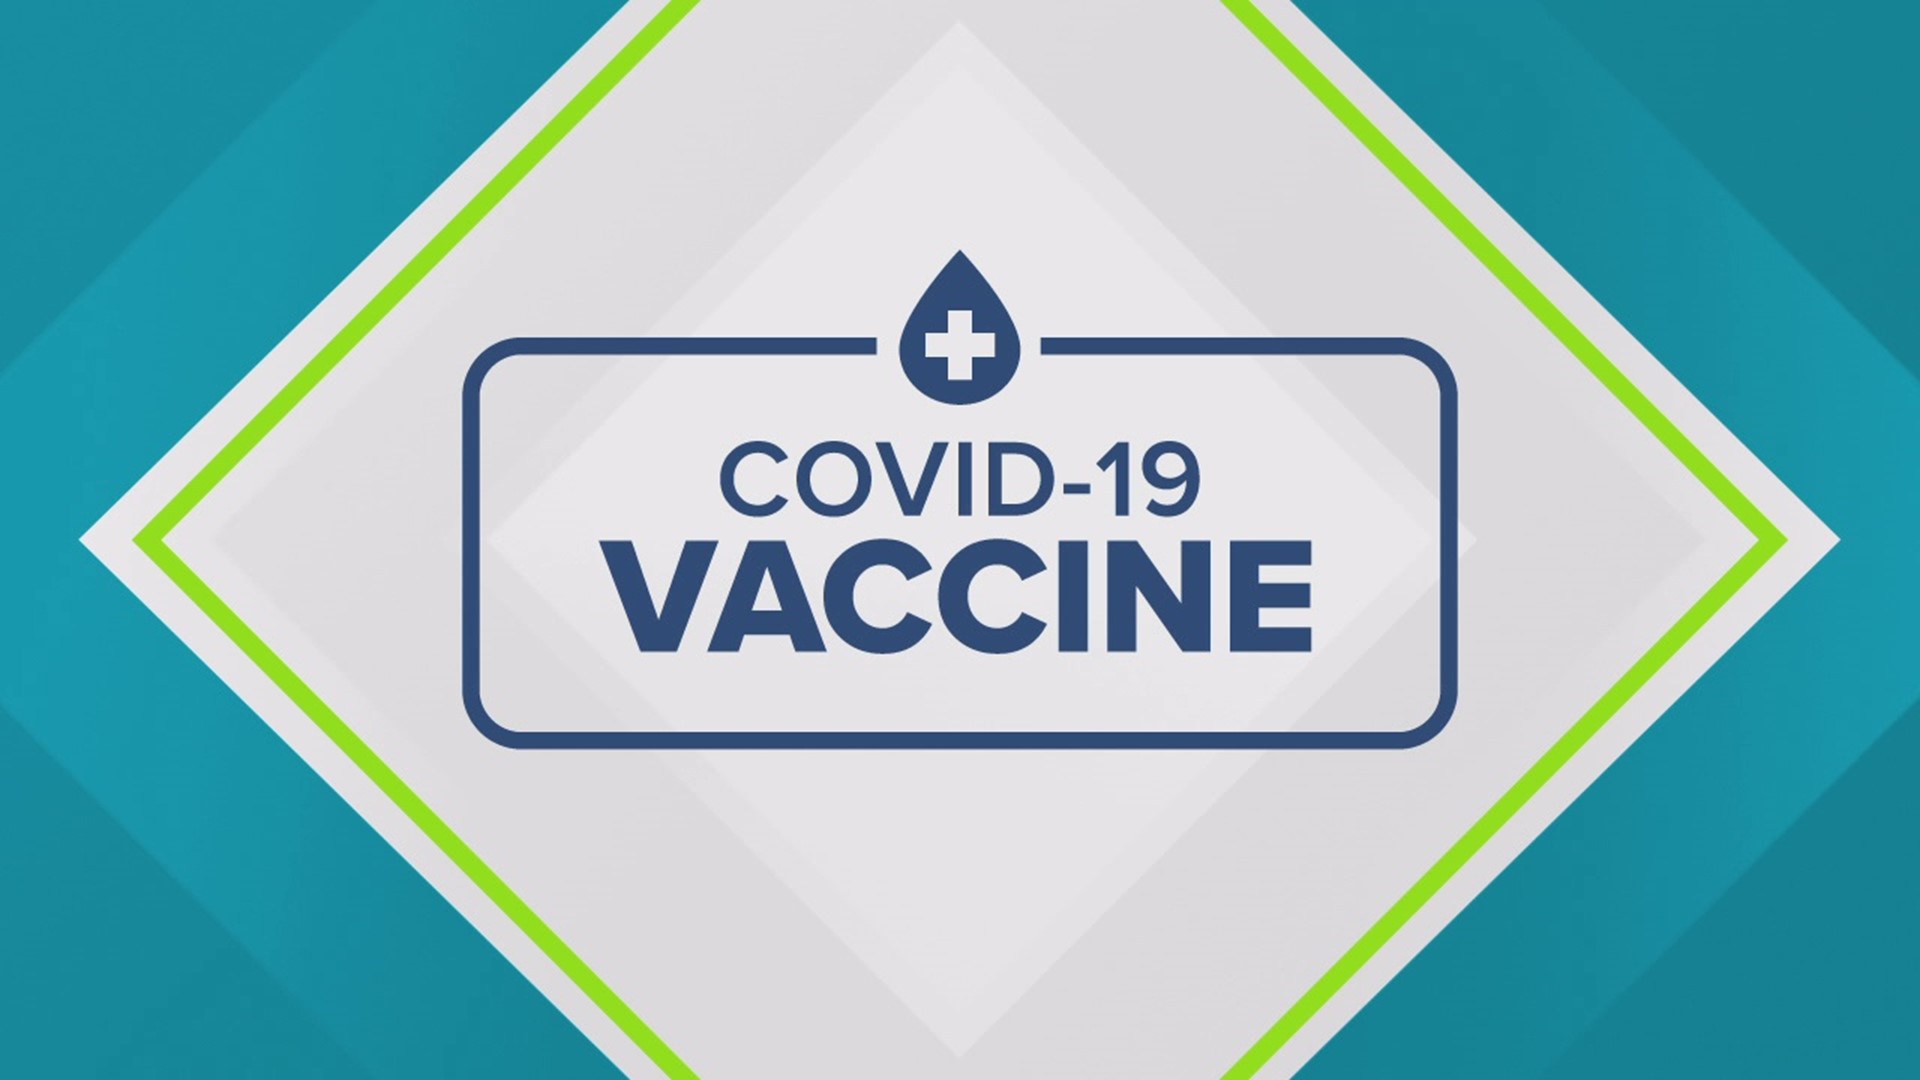 Salado Independent School District is the first in our area to offer COVID-19 vaccines to students.